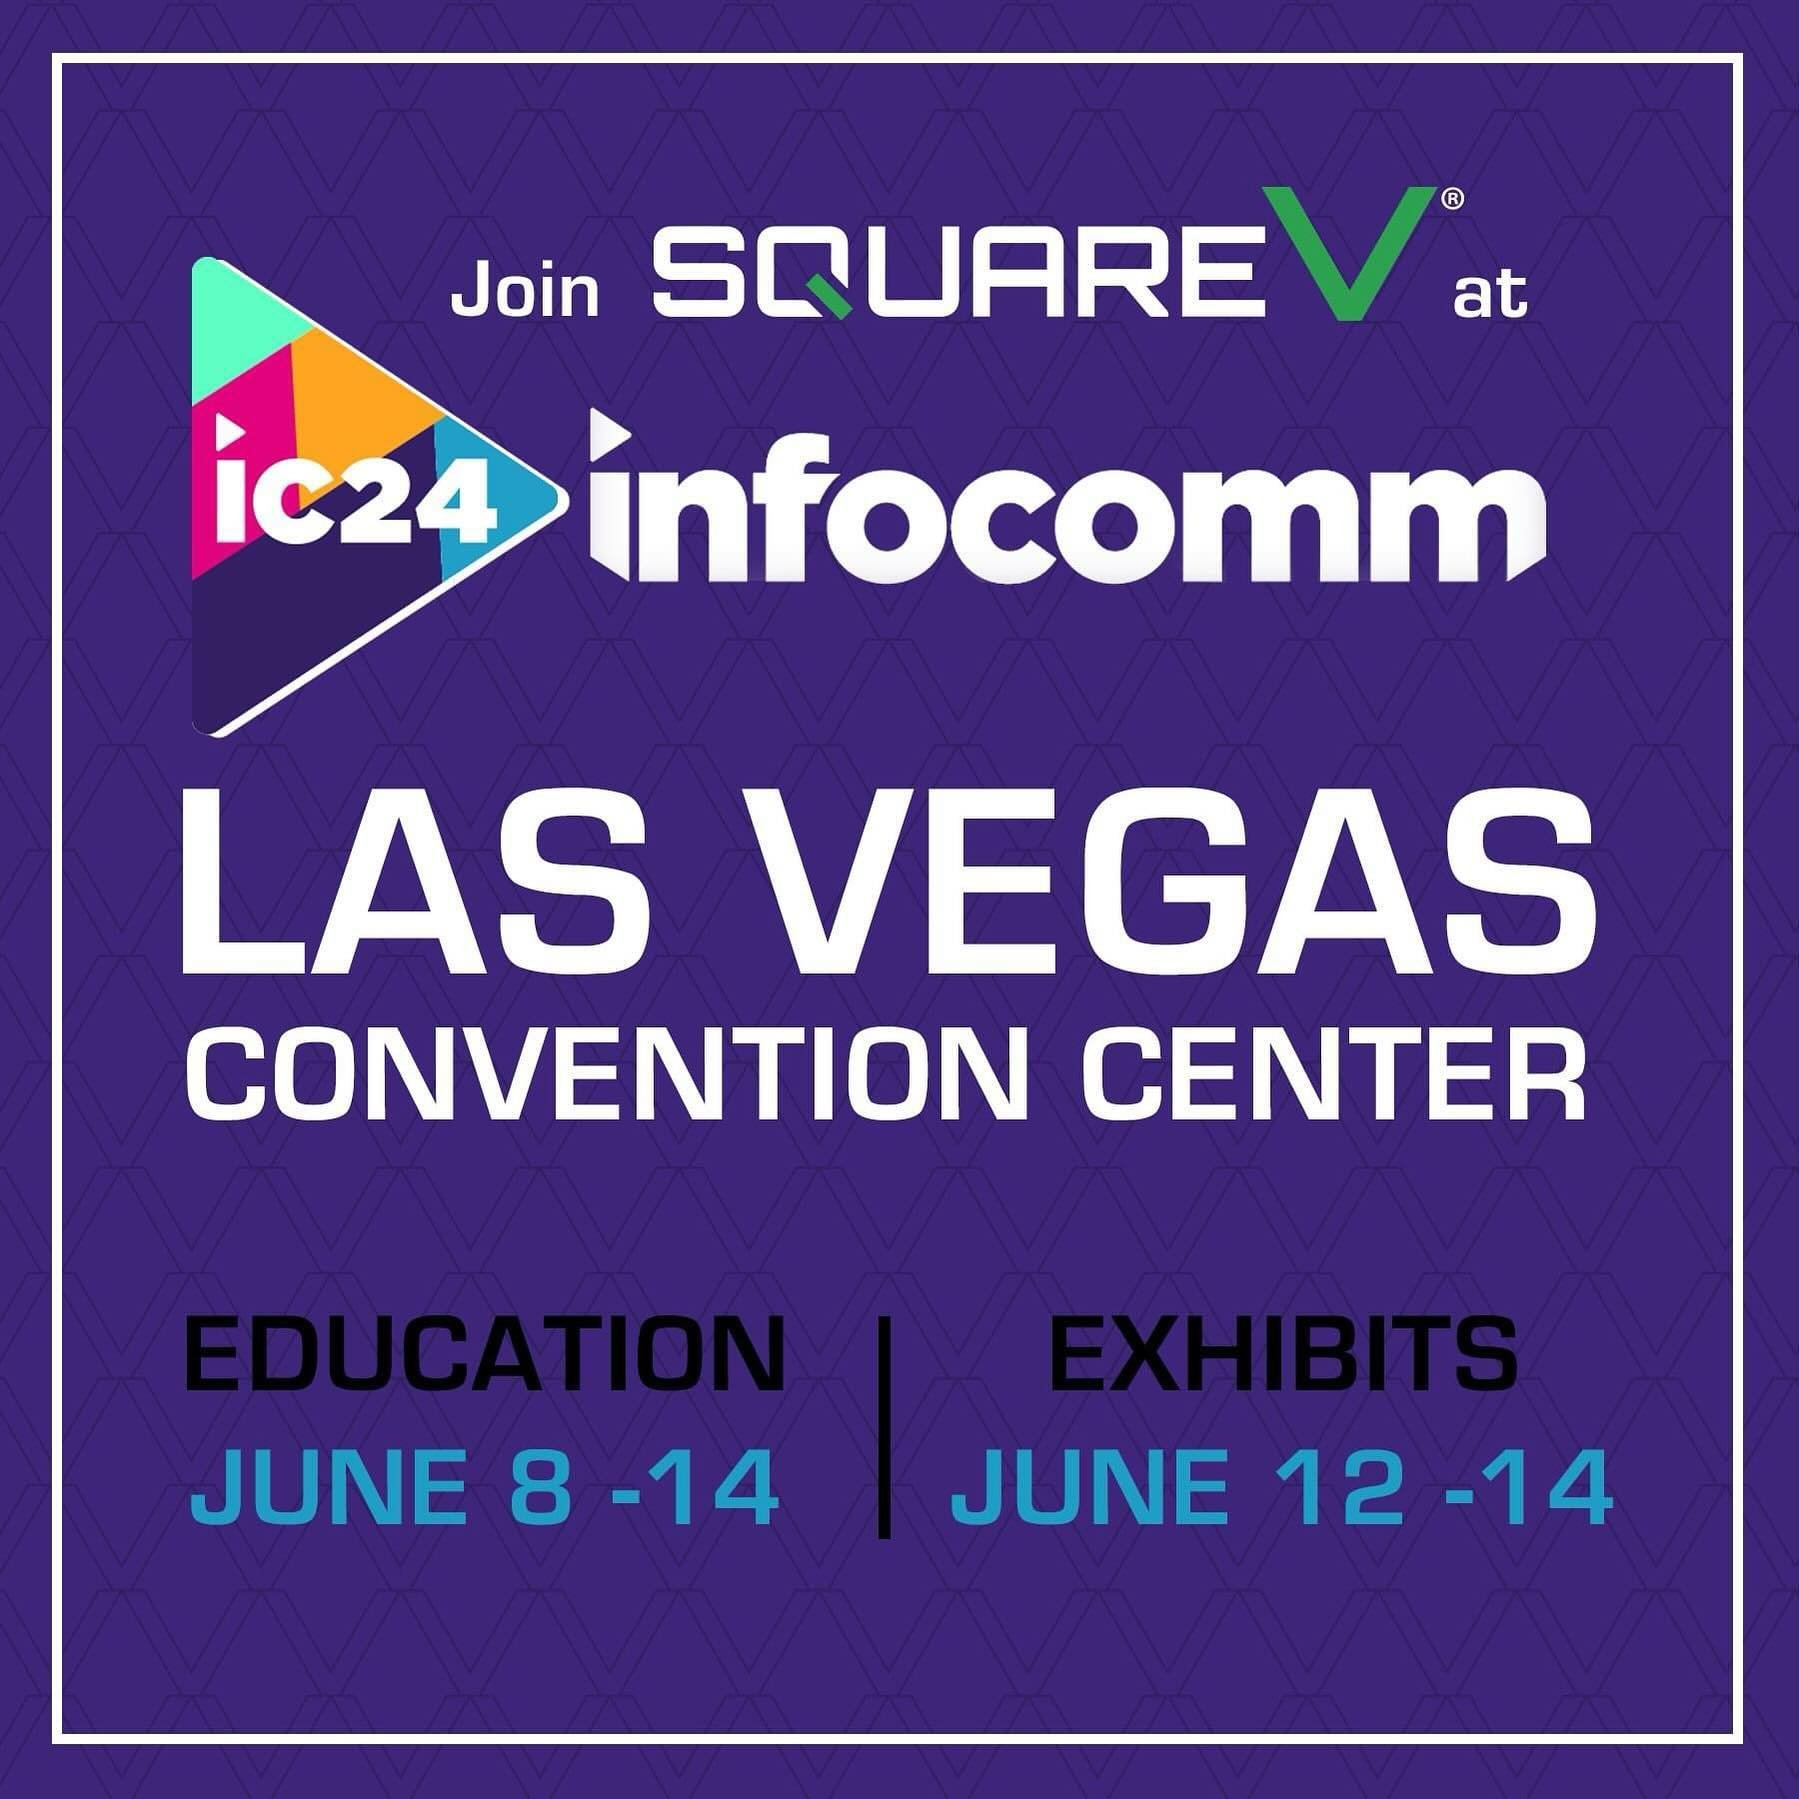 We&rsquo;re excited to announce that squareV will be attending the @infocommshow this June! 🎉

Our team is currently prepping for another great show and can&rsquo;t wait to meet you there.

Stay tuned for more information and registration in the com